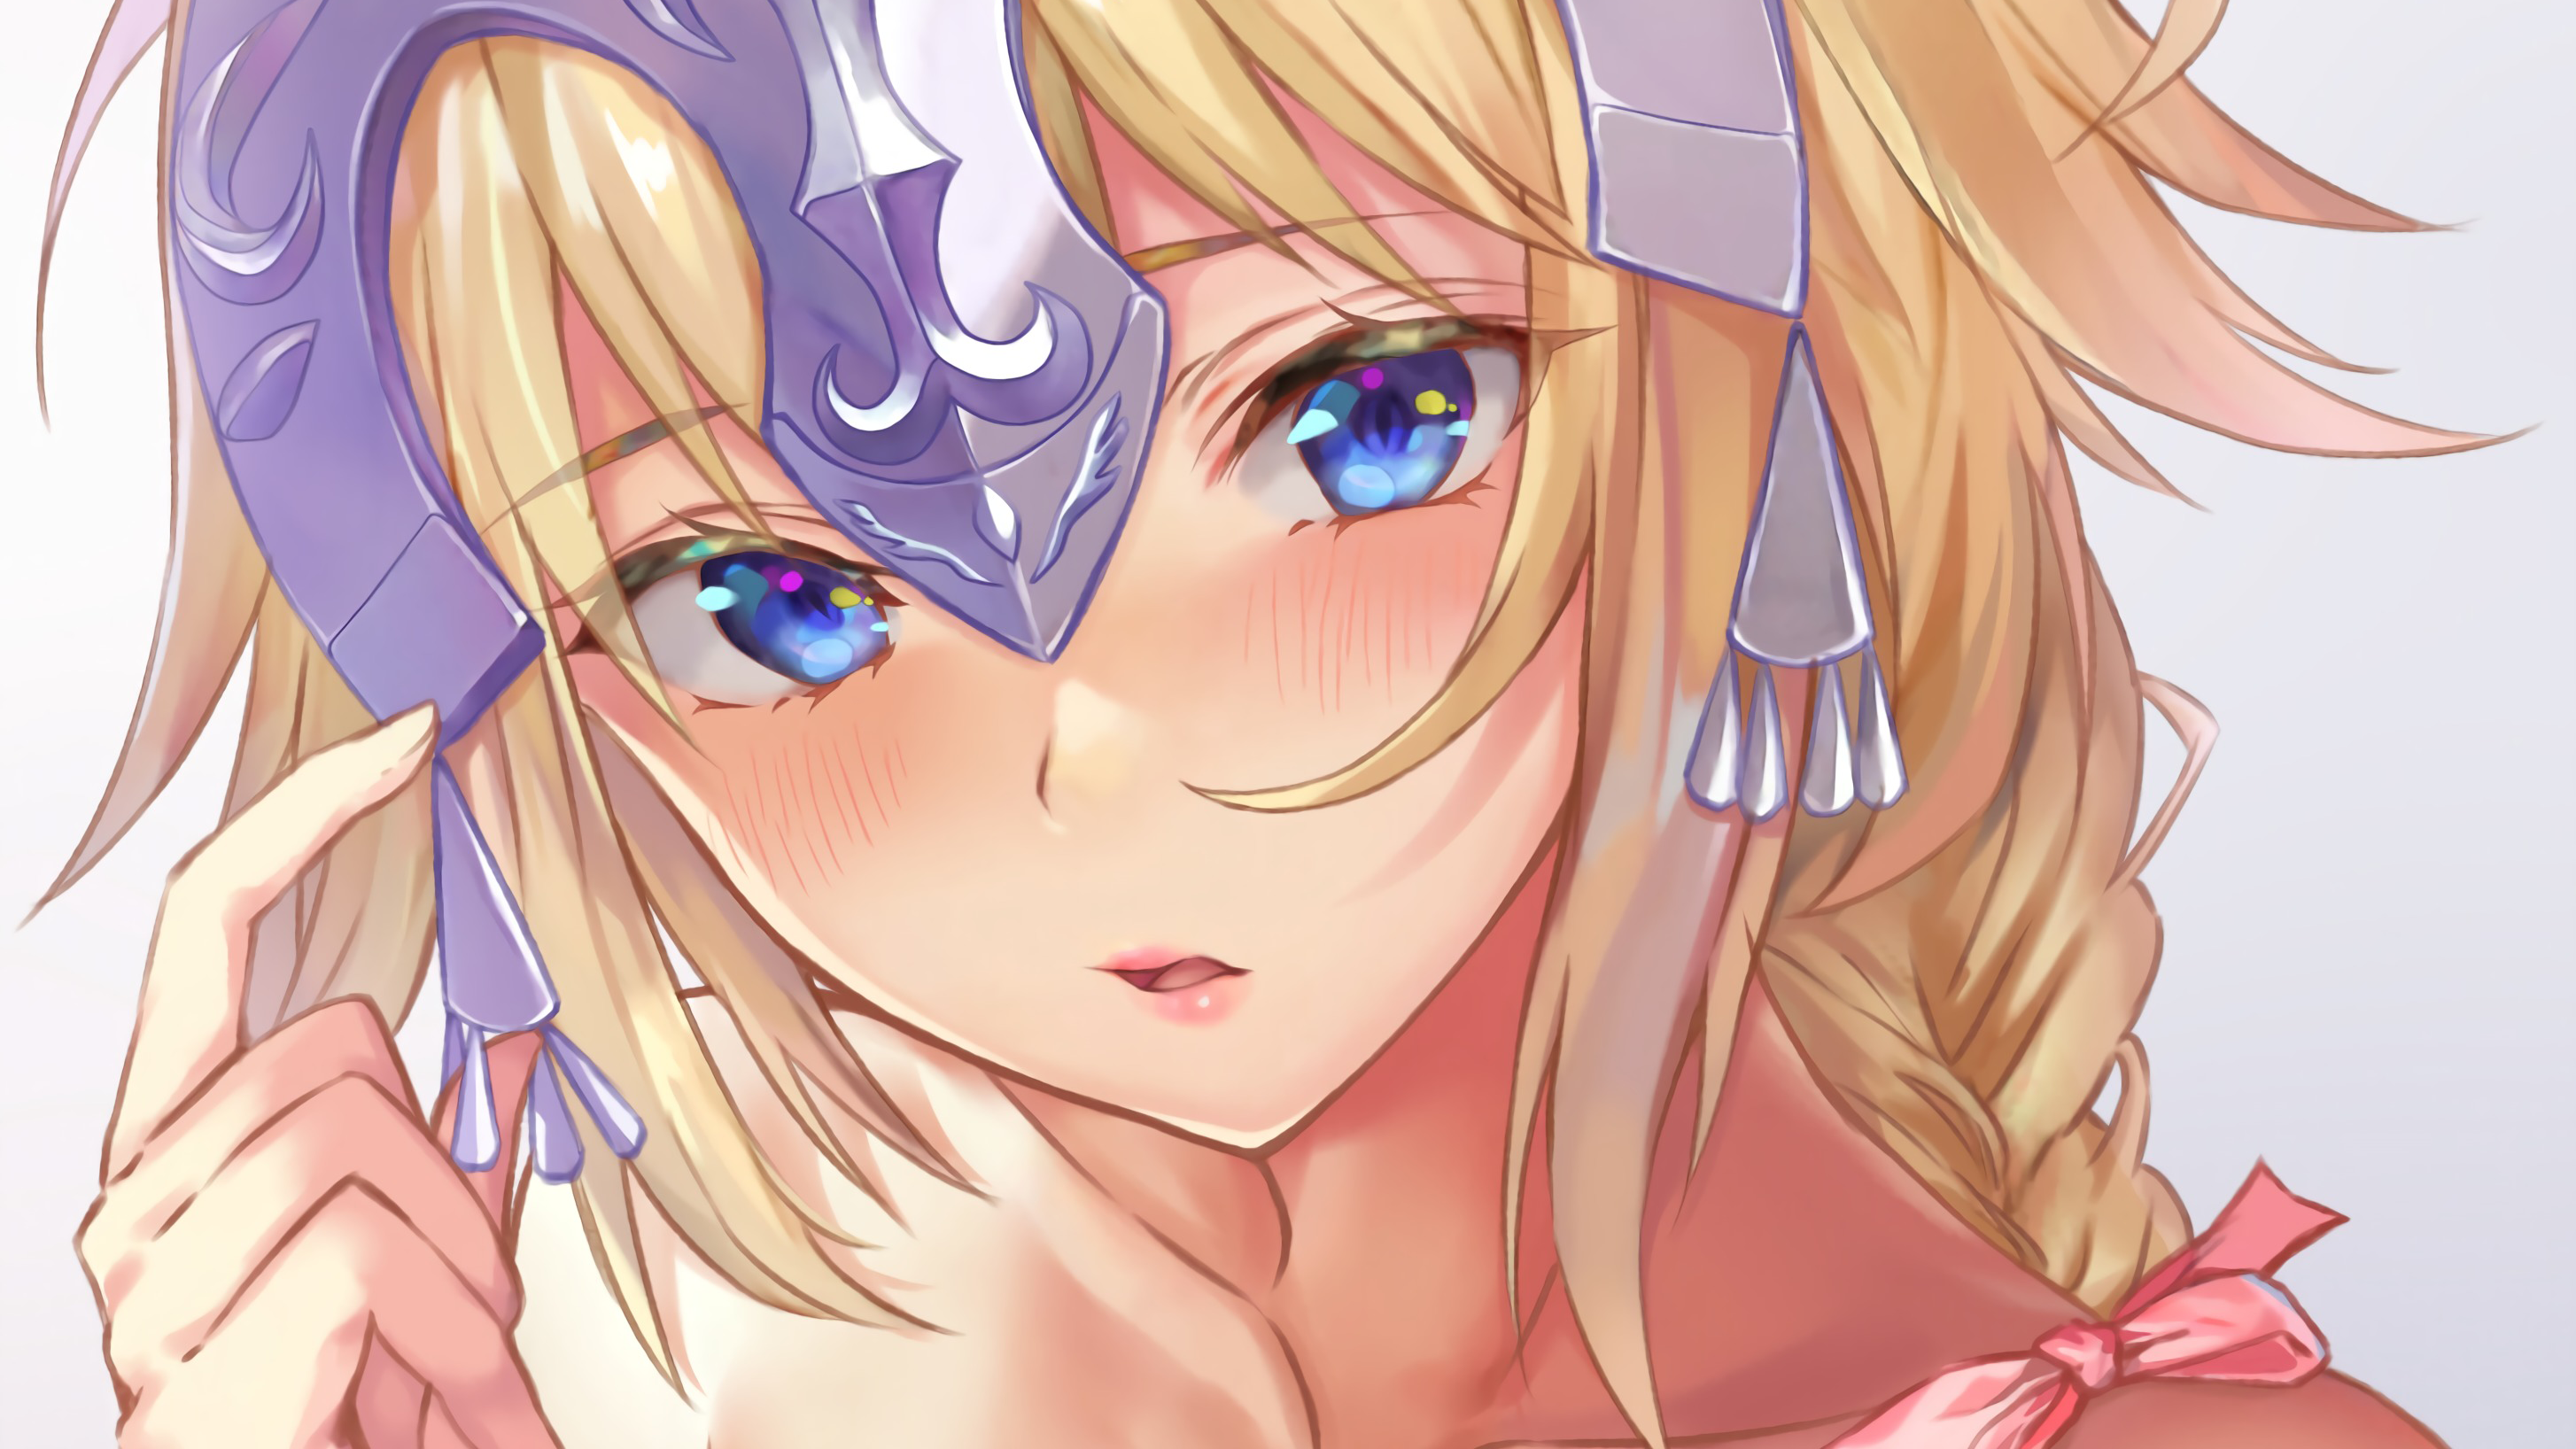 Anime 2908x1636 Fate/Grand Order Ruler (Fate/Grand Order) Fate series blonde blue eyes long hair knot anime girls Jeanne d'Arc (Fate) face cropped artwork Aimee